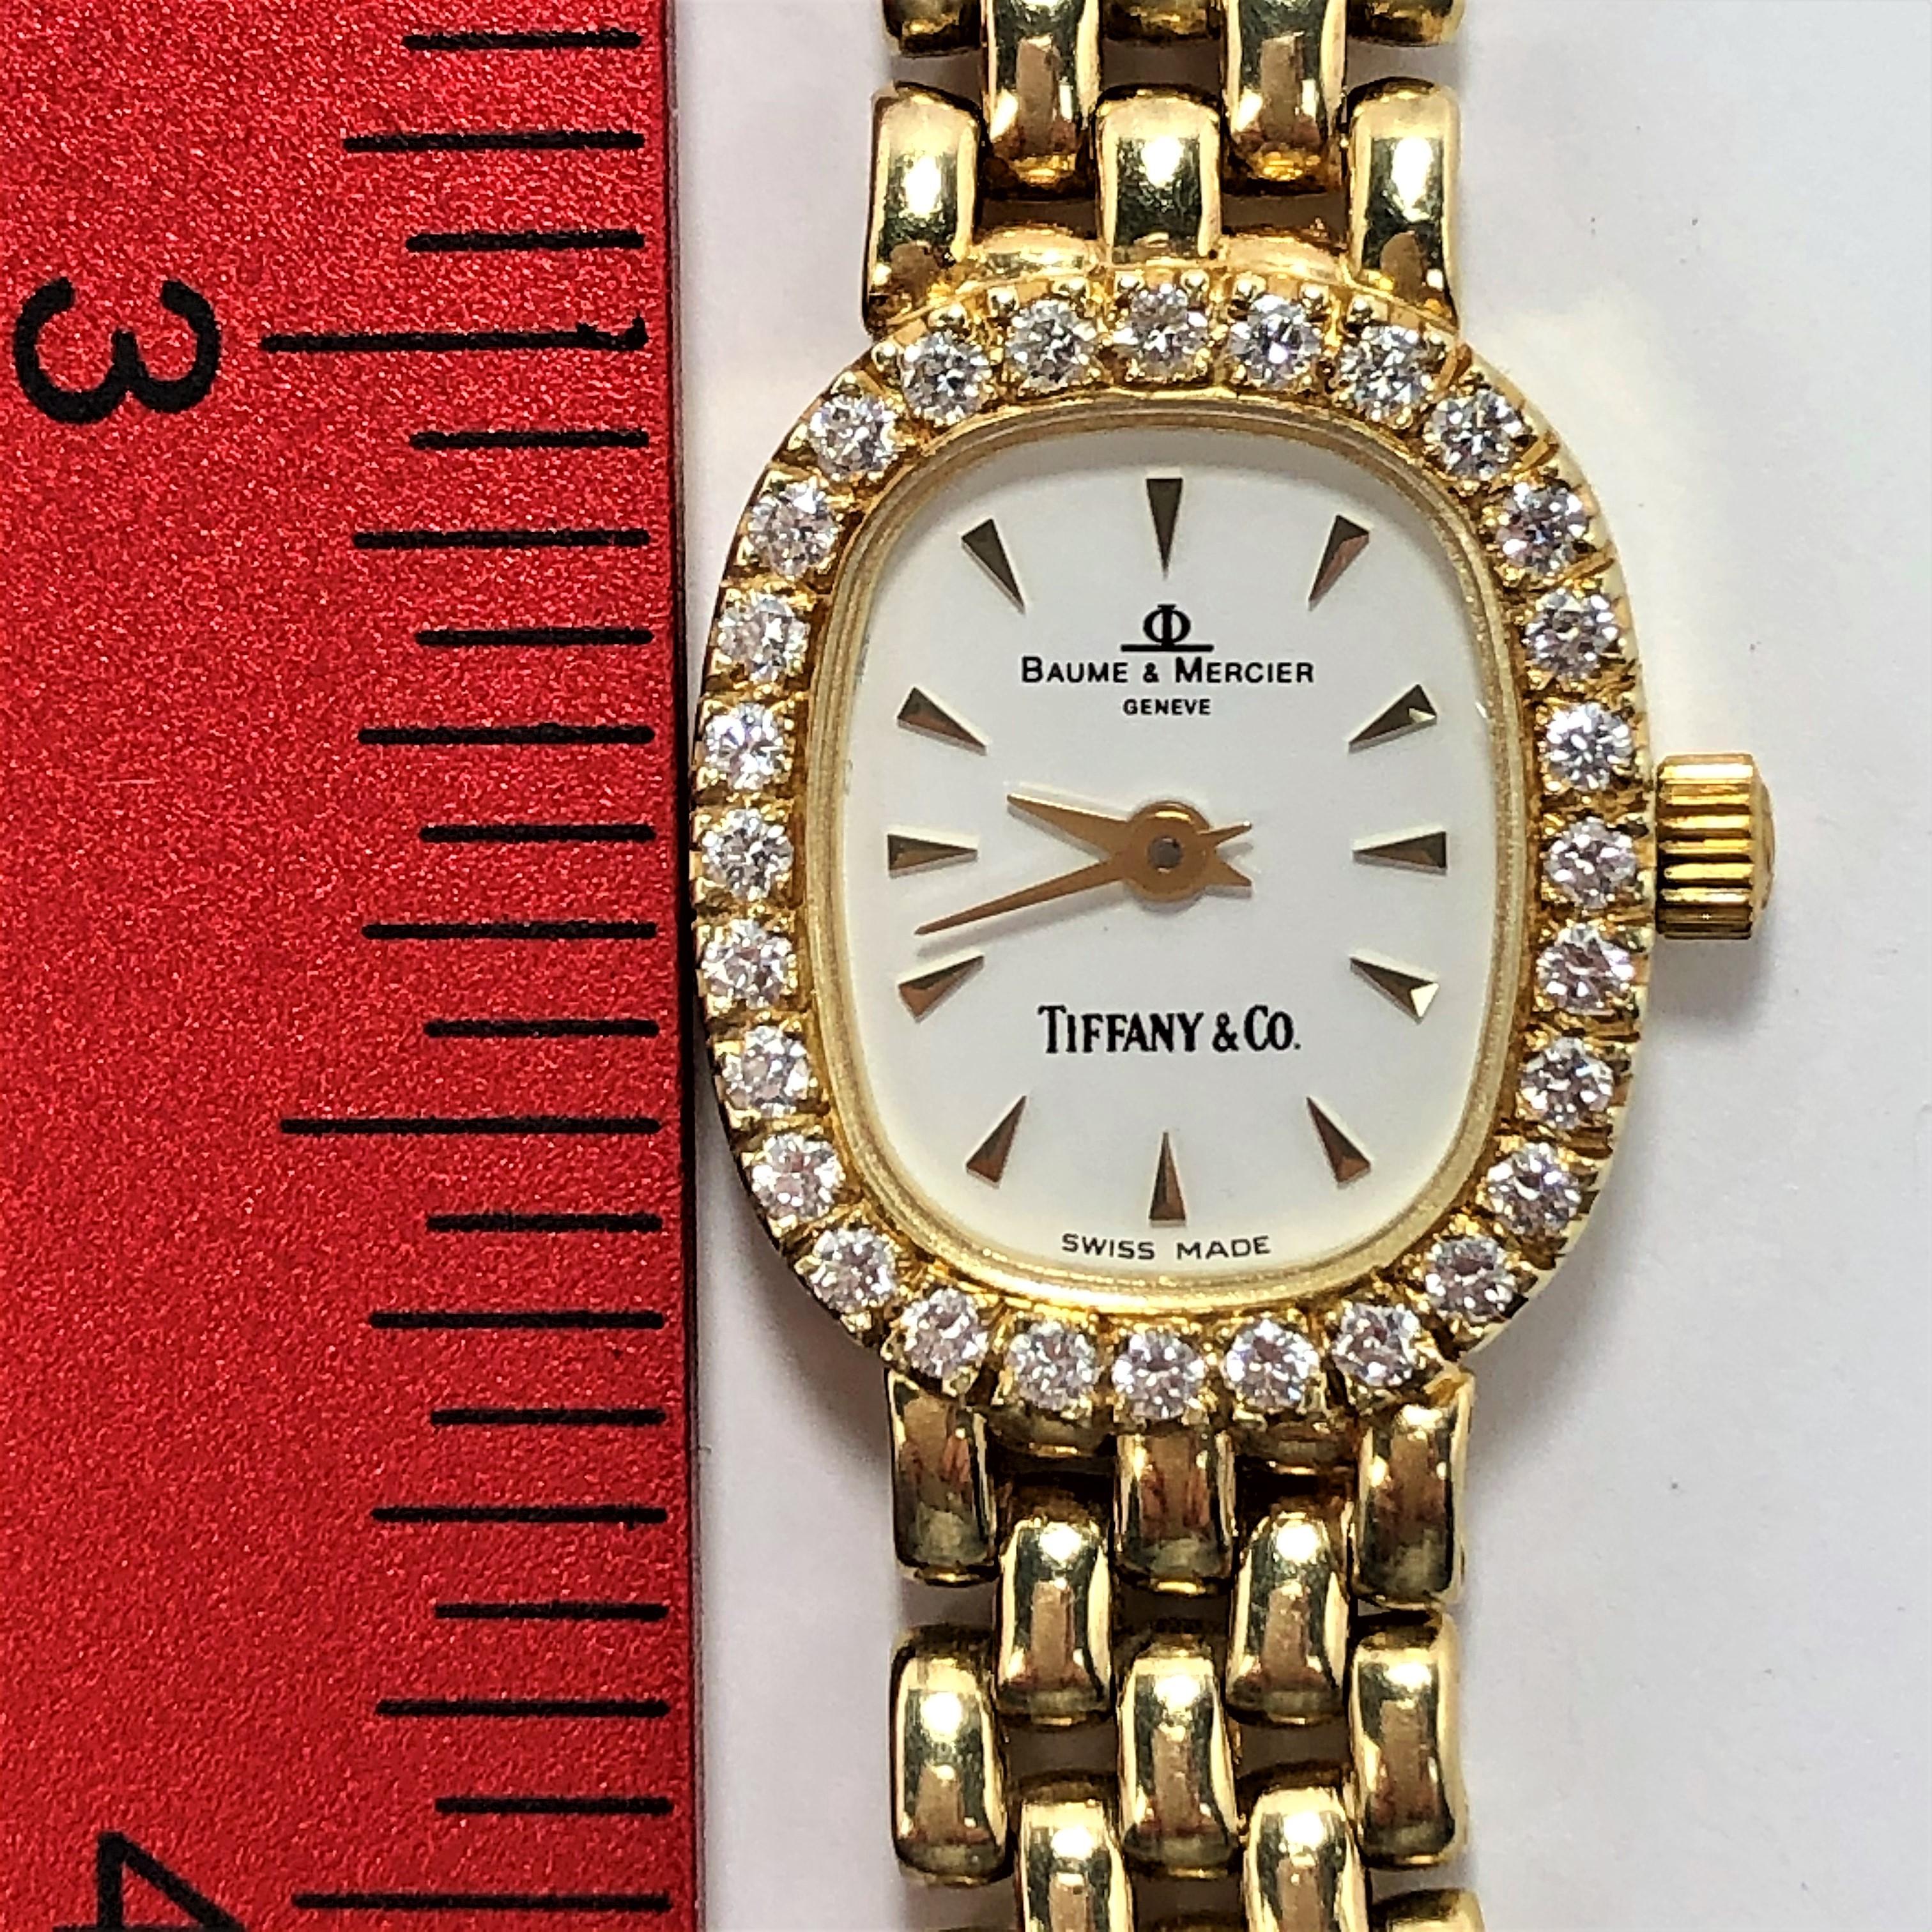 Made by Baume & Mercier for Tiffany, this dainty 14K yellow gold 
watch is bezel set with 28 round brilliant cut diamonds weighing
and approximate total of .45CT of G Color and VS1 Clarity. The
integral gold band offers three different settings